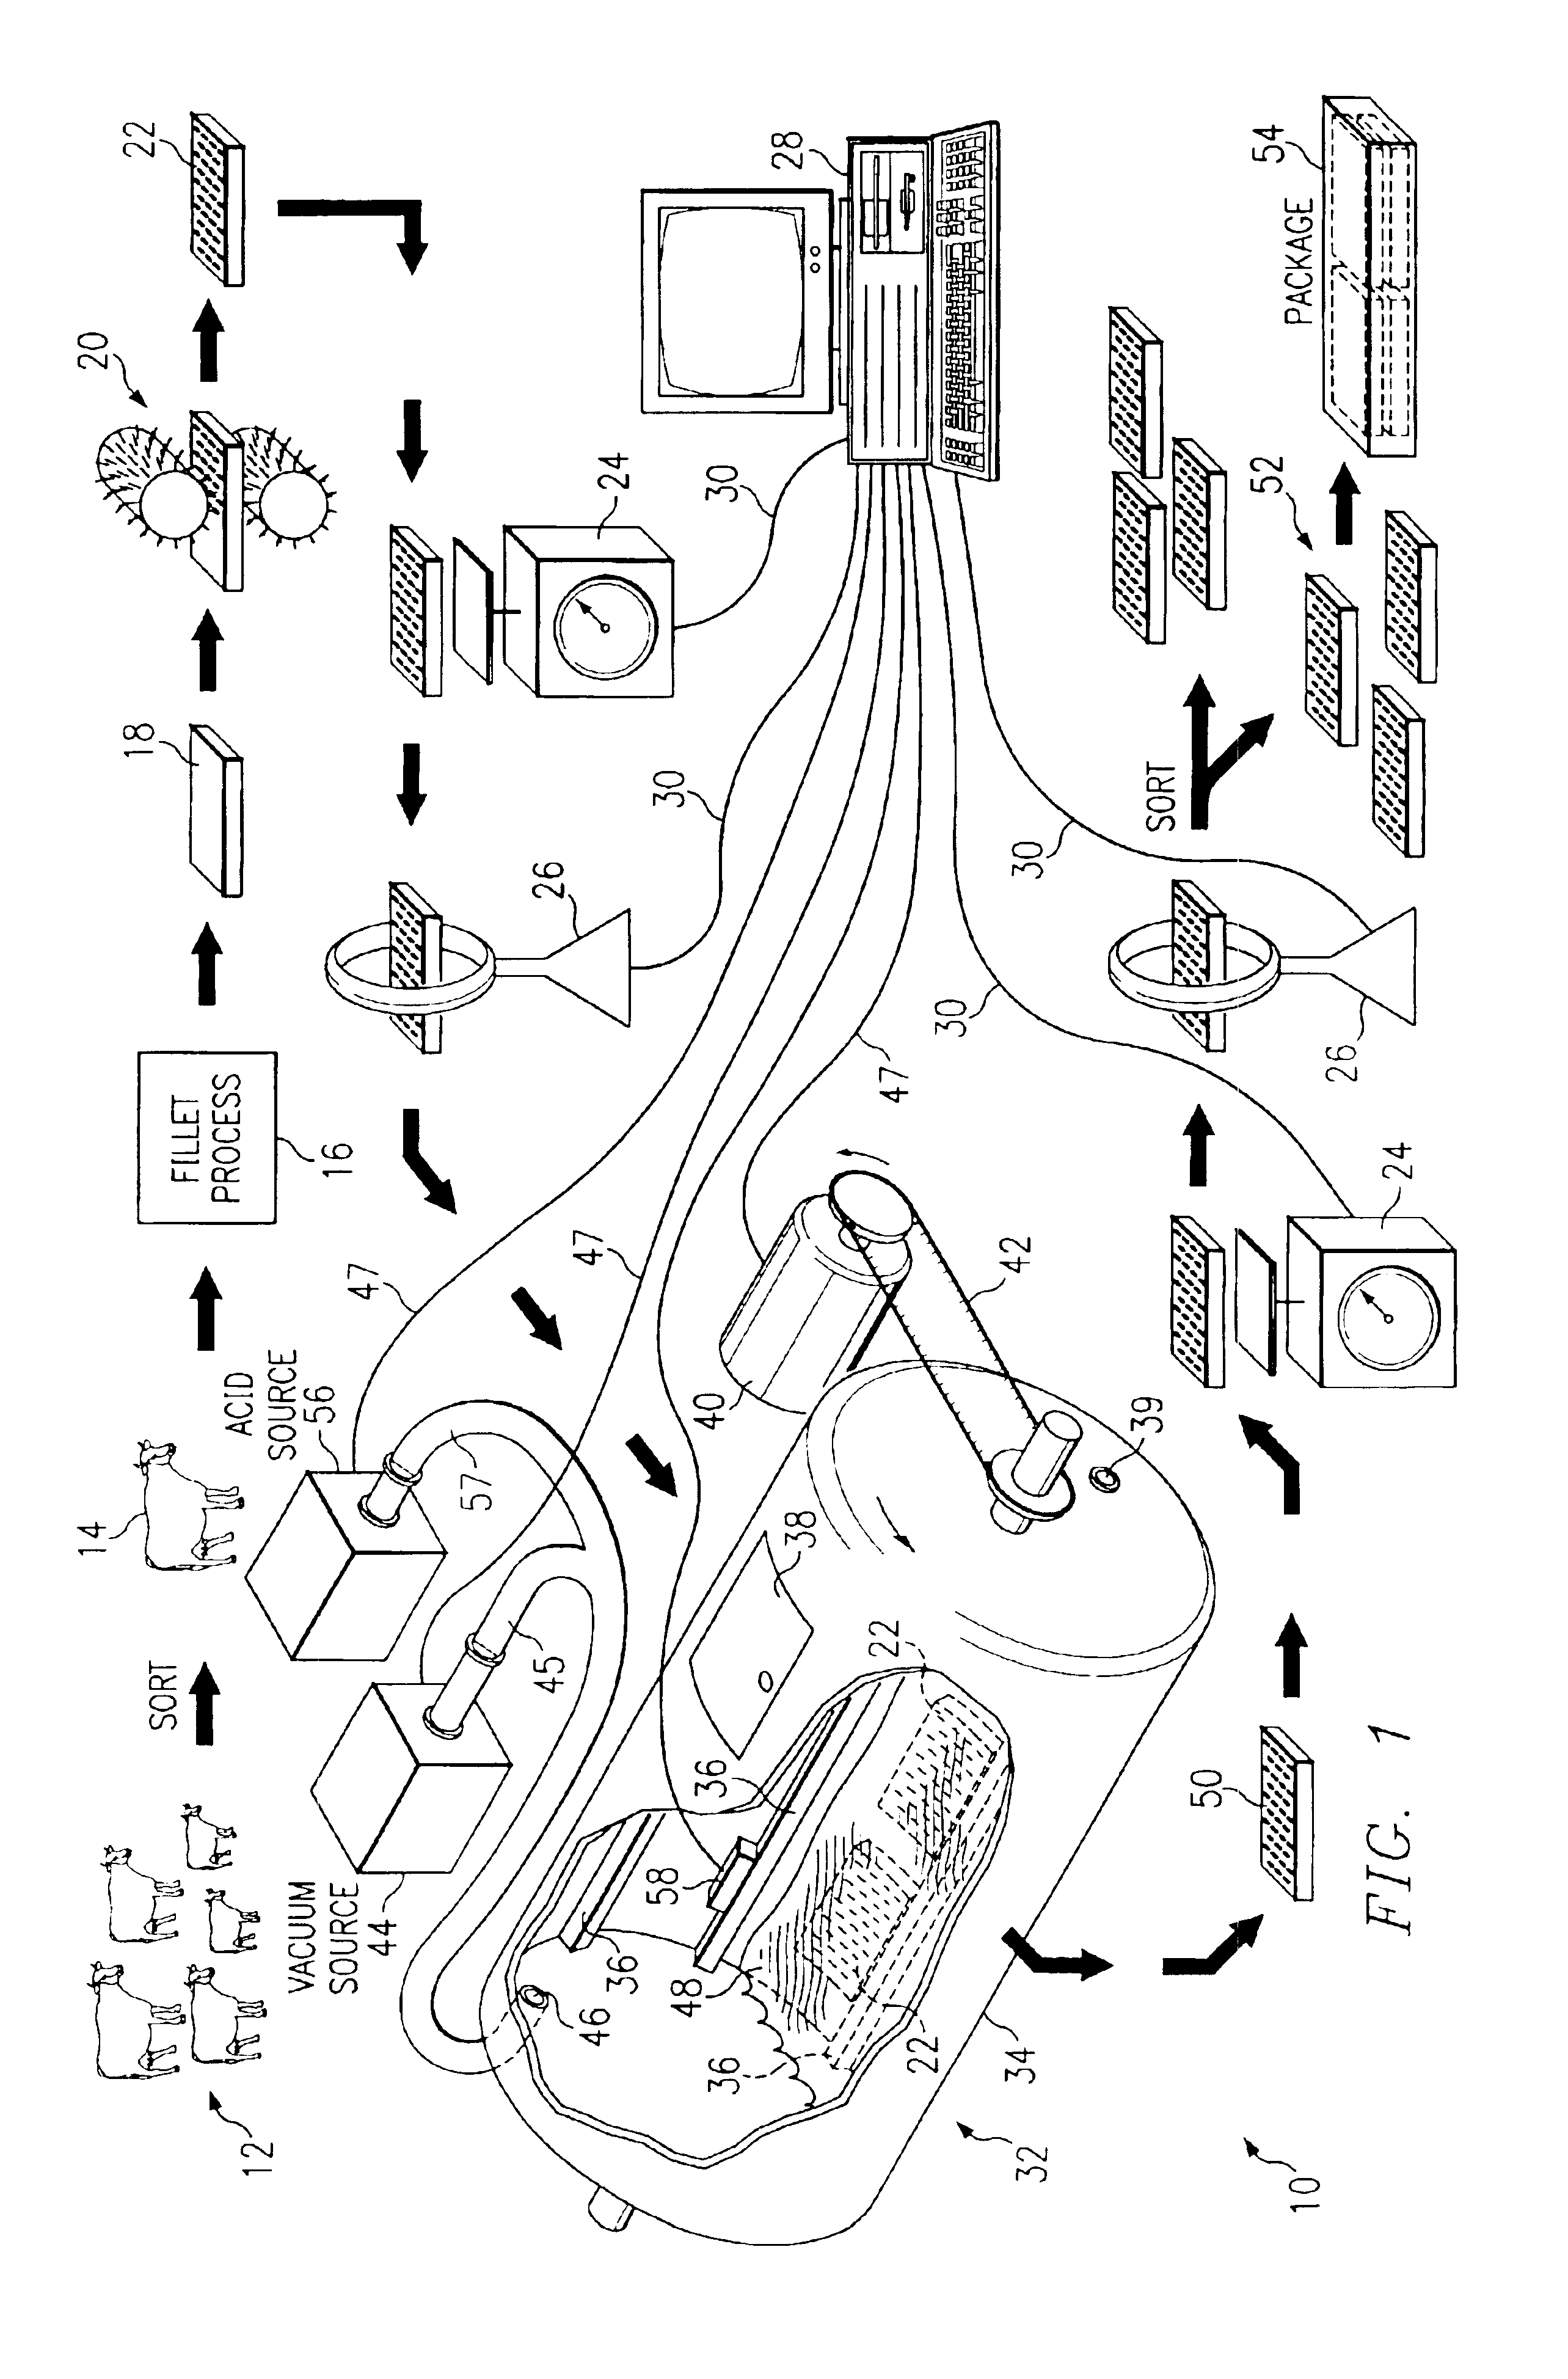 Method of reducing bacteria and fat content of food products